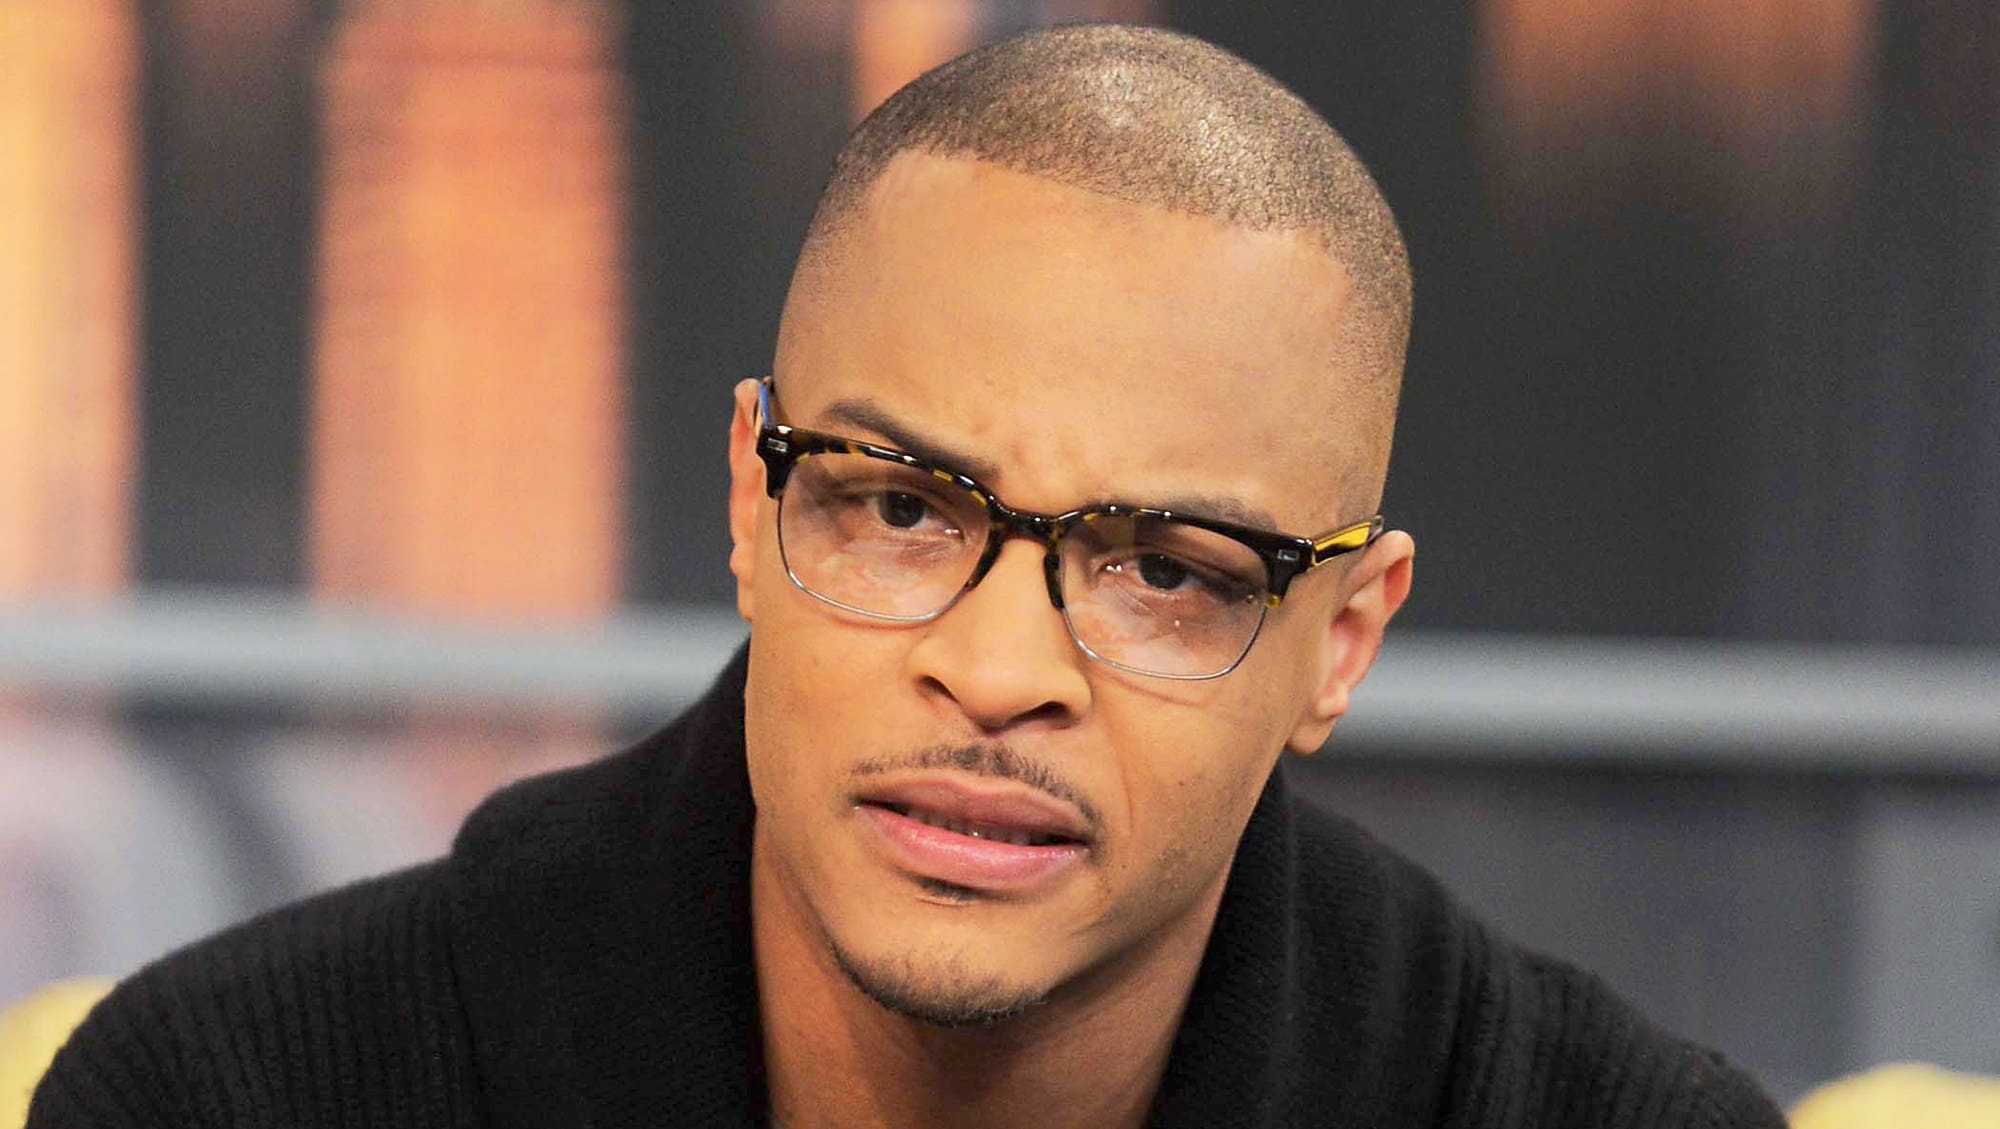 T.I. Tells His Fans To Educate Themselves On Their History - Check Out The David Banner Podcast